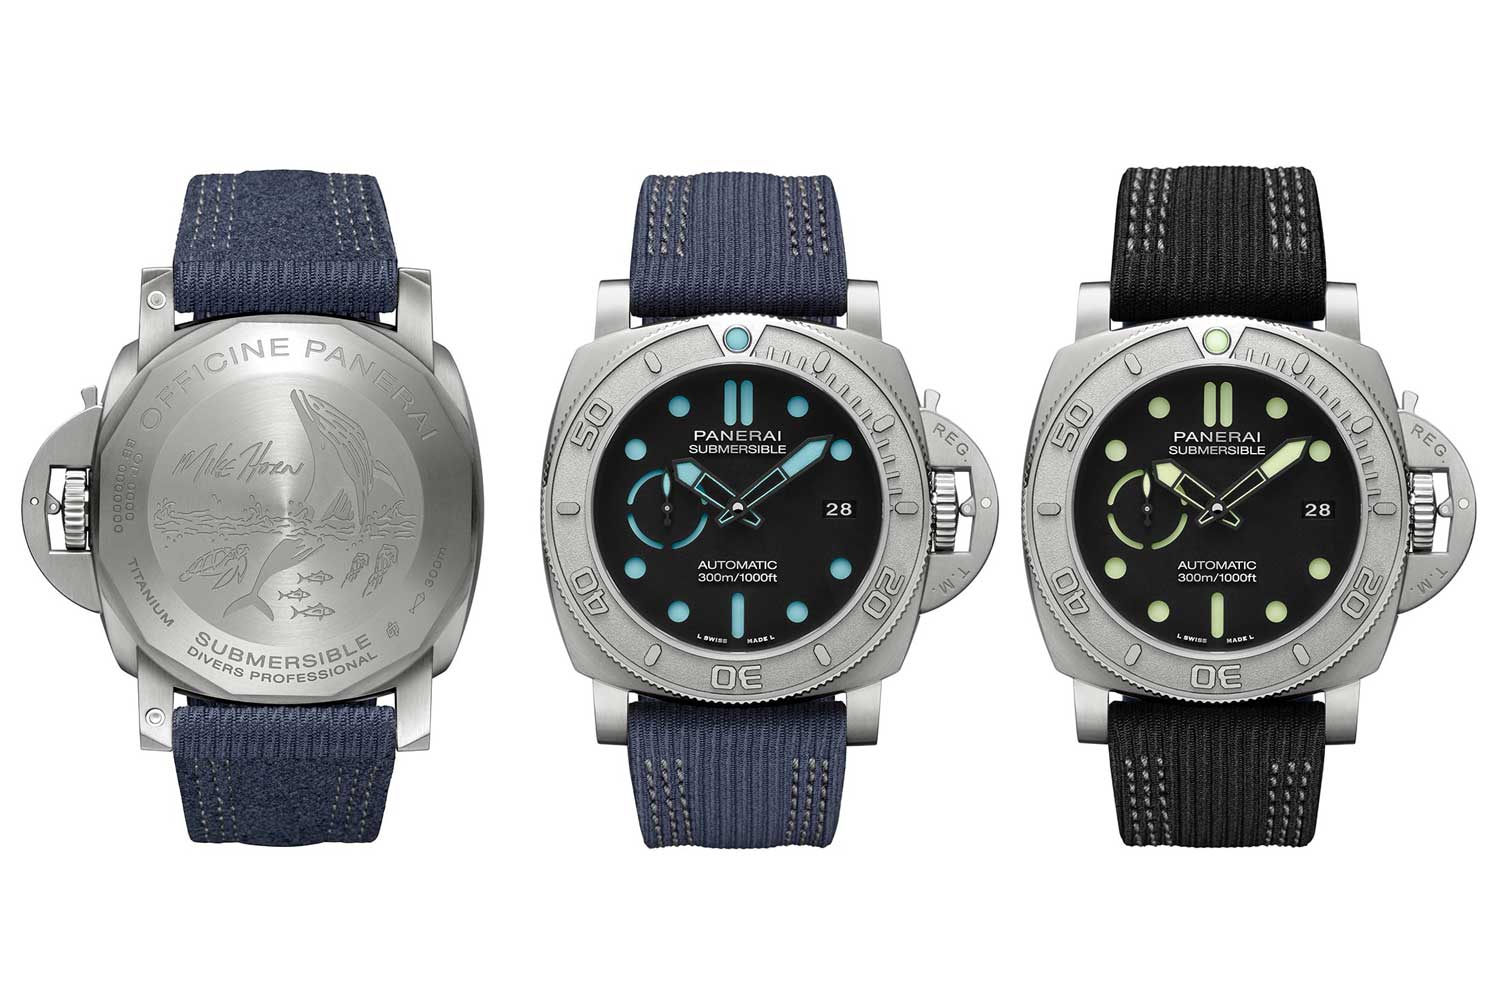 Eramet, a specialist in the production of titanium alloys, helped Panerai introduce its first recycled titanium watches - the Mike Horn Edition Submersibles PAM 984 and PAM 985 in 2019